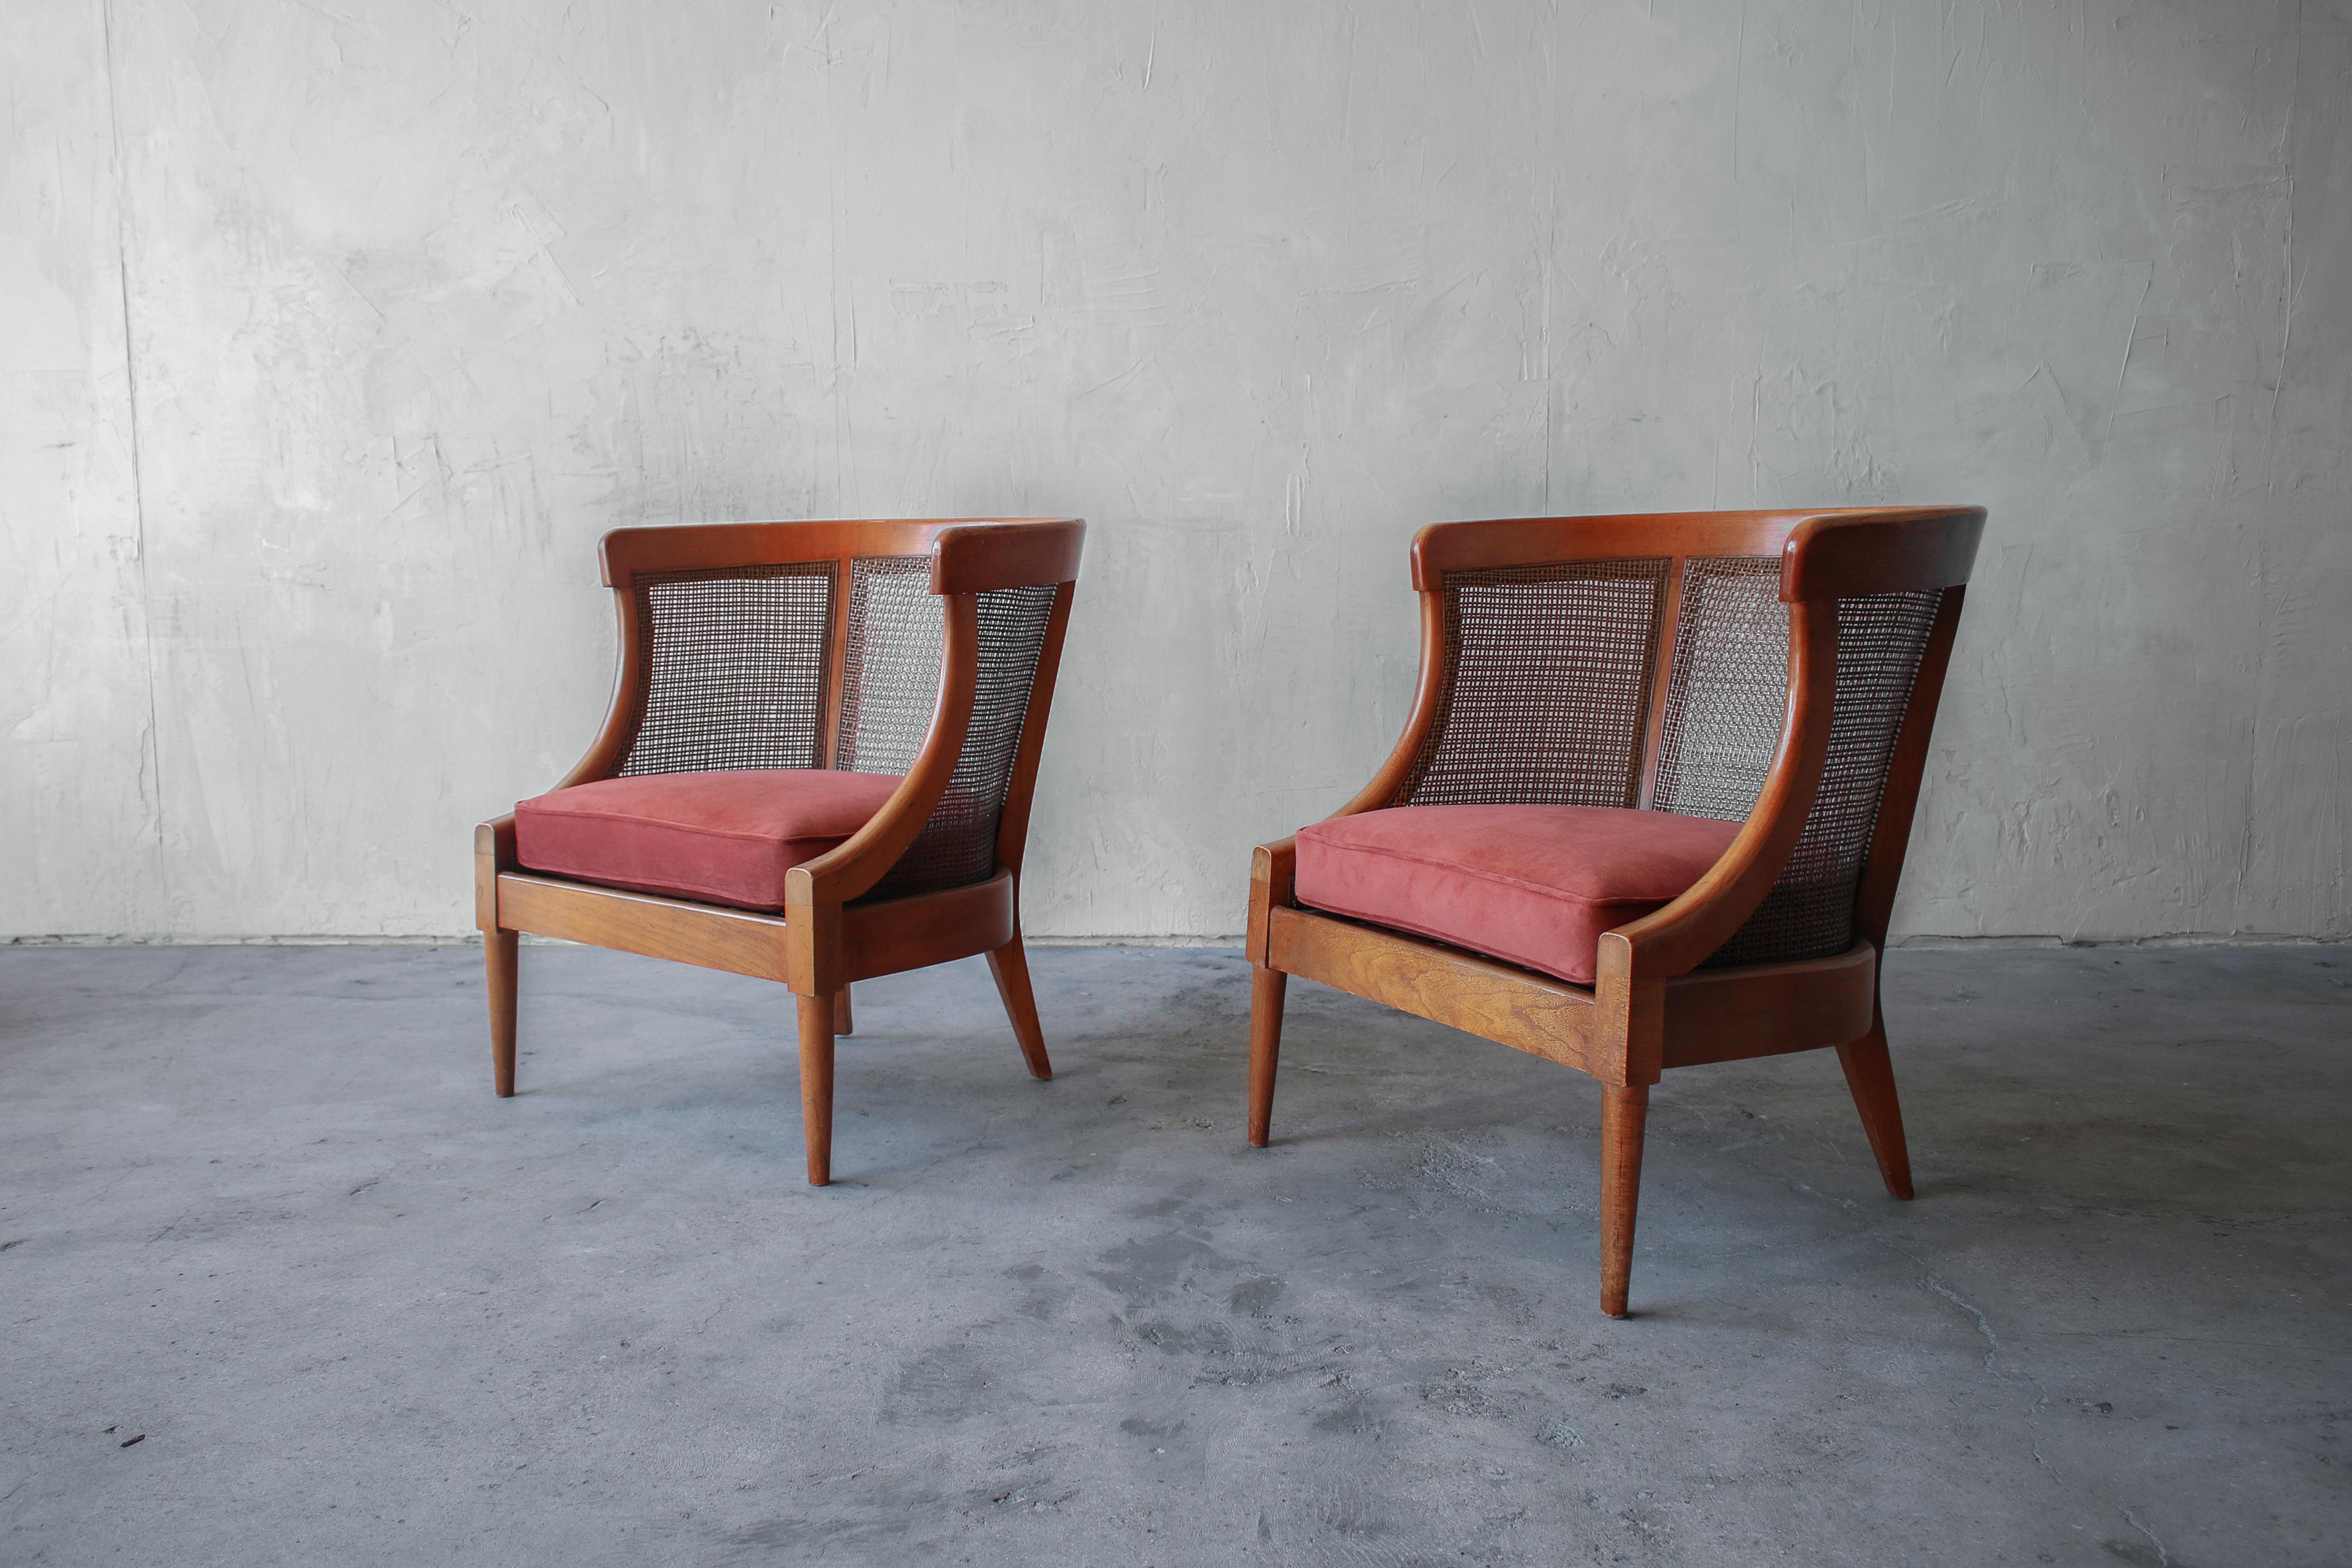 Pair of exquisite cane lounge chairs by Tomlinson. 

The chairs are in beautifully patinaed condition with some slight wear to the cane and wood, they have been reupholstered with new seat foam in a gorgeous rust colored, cotton velvet. The cane